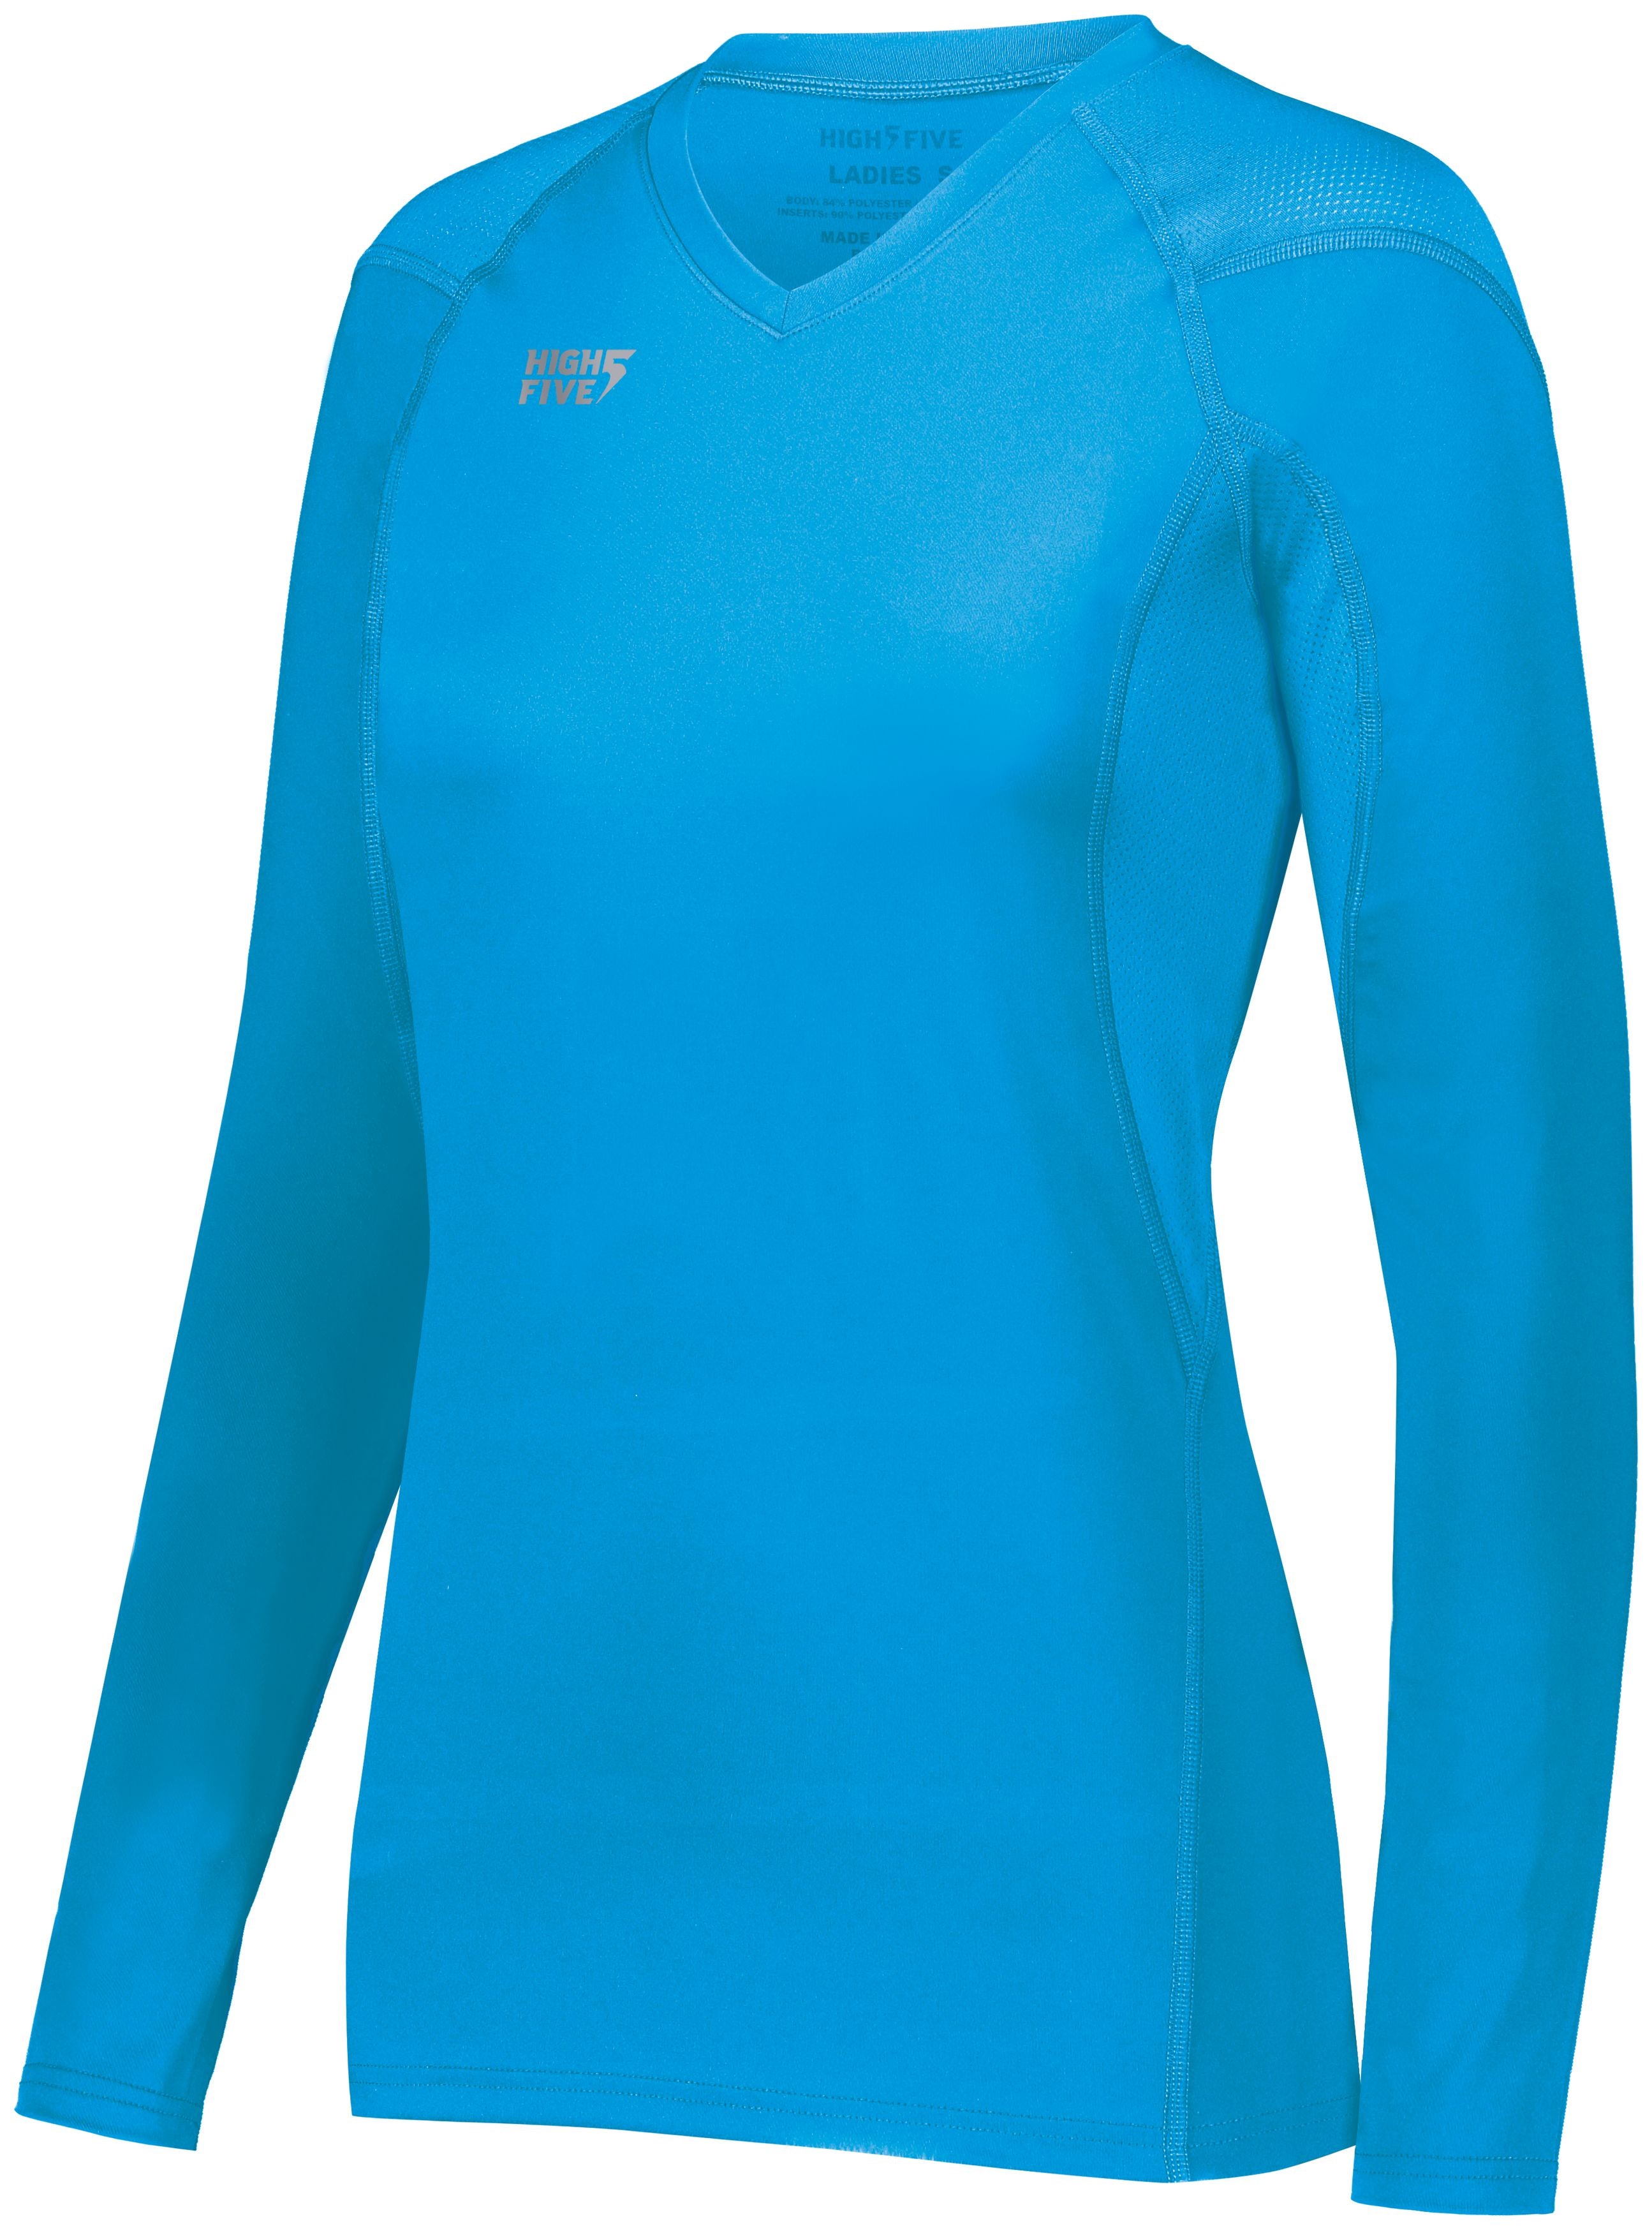 High 5 Ladies Truhit Long Sleeve Jersey in Power Blue  -Part of the Ladies, Ladies-Jersey, High5-Products, Volleyball, Shirts product lines at KanaleyCreations.com